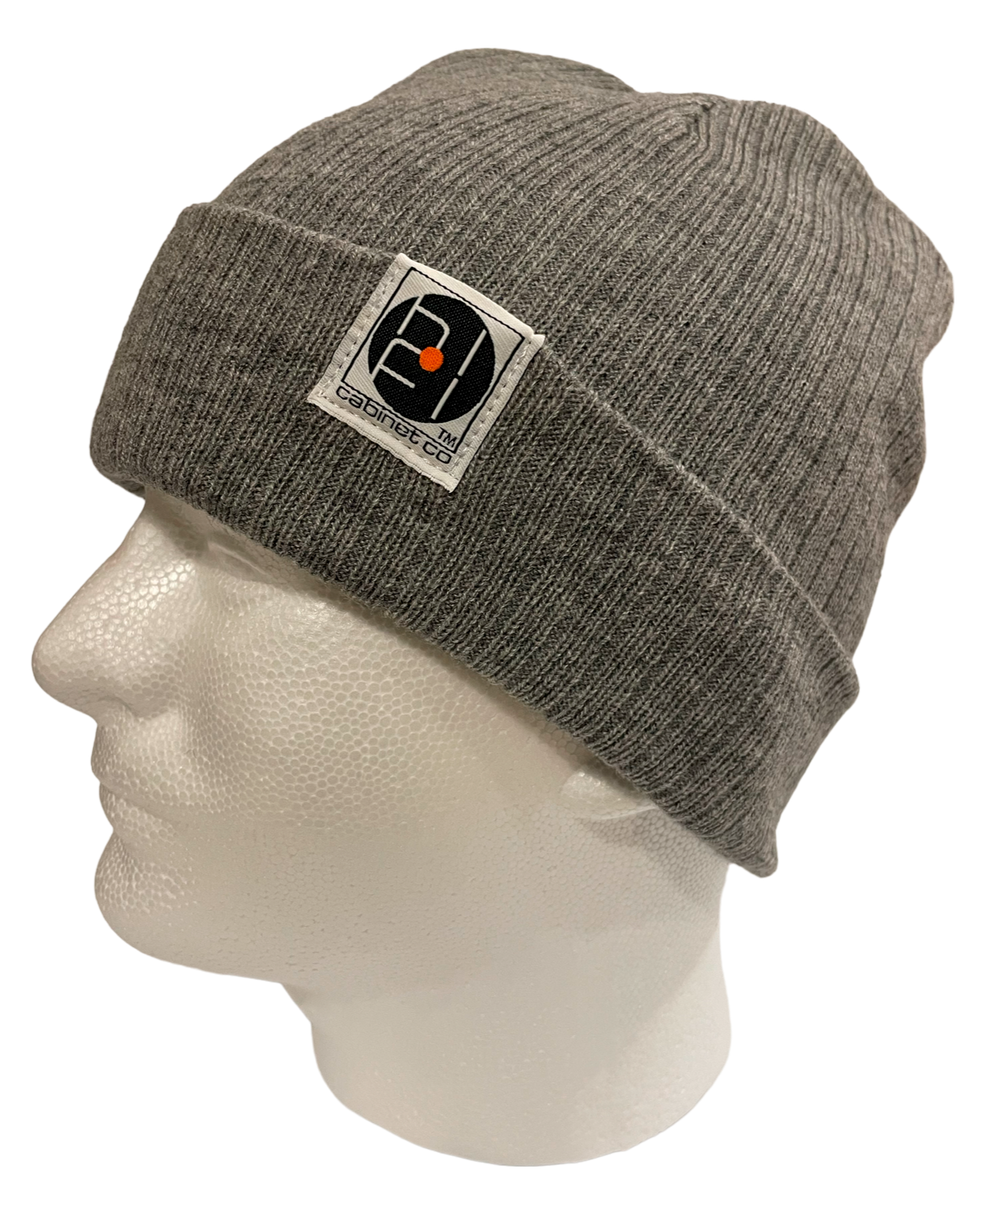 Eco-Friendly Beanie Made From Recycled co – cabinet hifi Bottles. Plastic